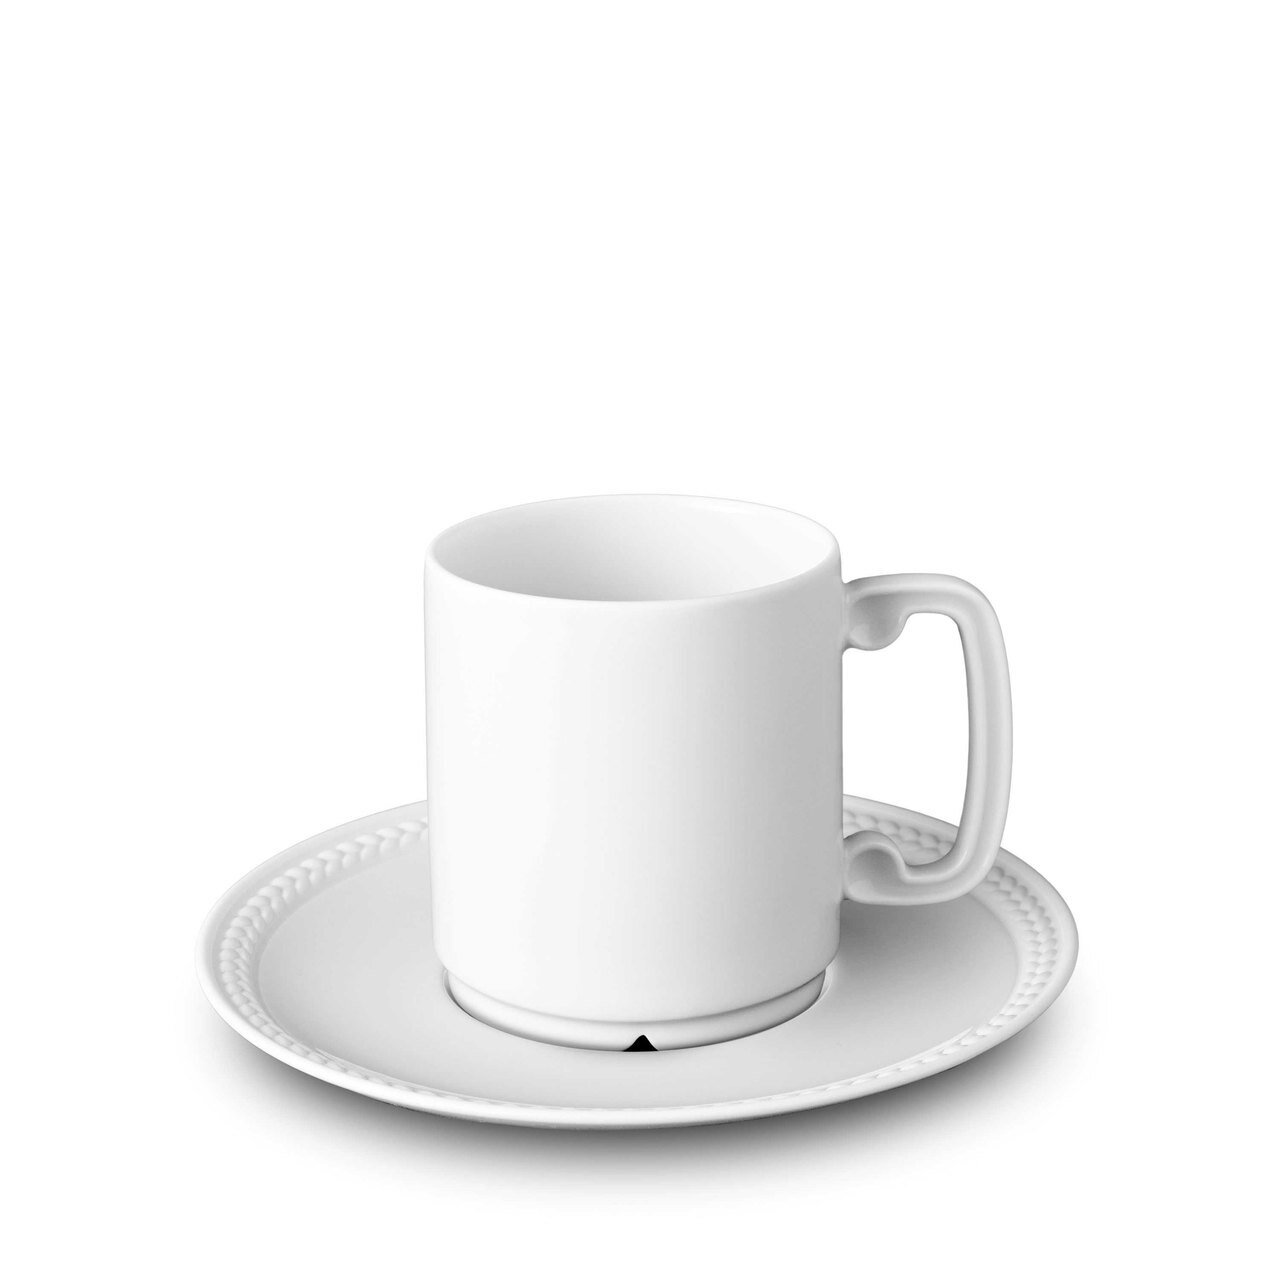 L'Objet Soie Tressee Espresso Cup and Saucer White